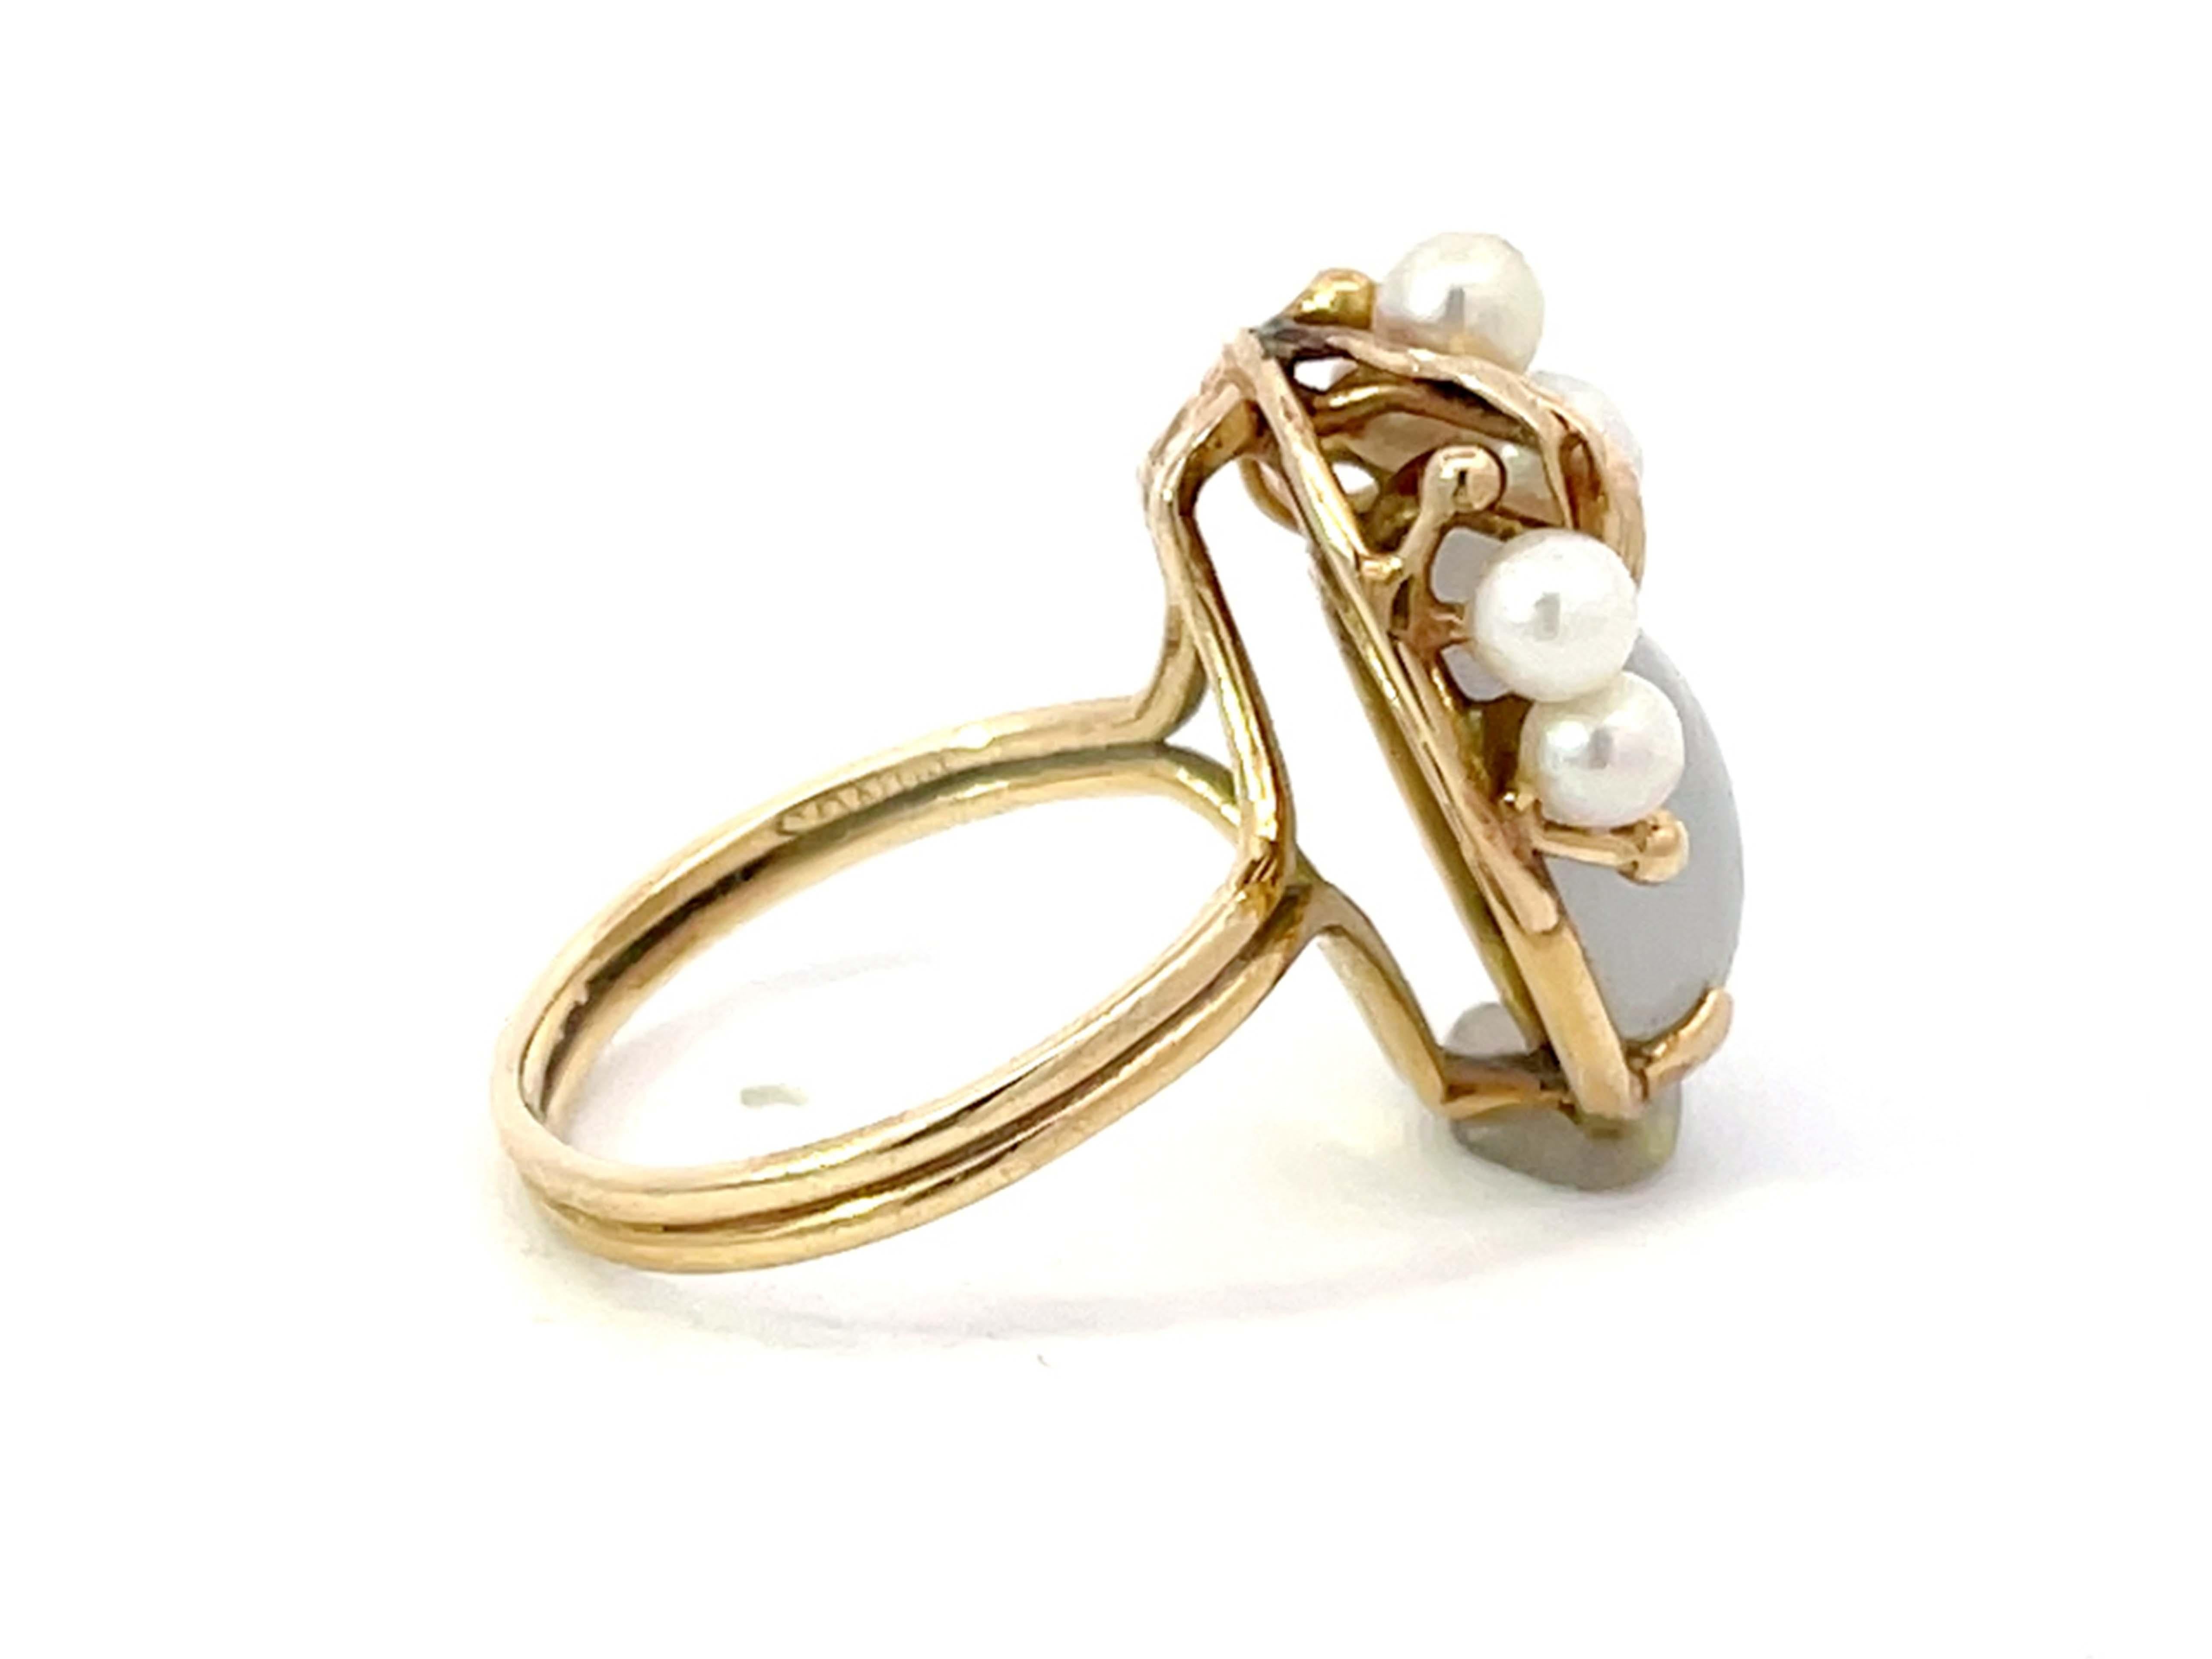 Mings Hawaii Oval Cabochon White Jade Pearl Leaf Ring 14k Yellow Gold In Excellent Condition For Sale In Honolulu, HI